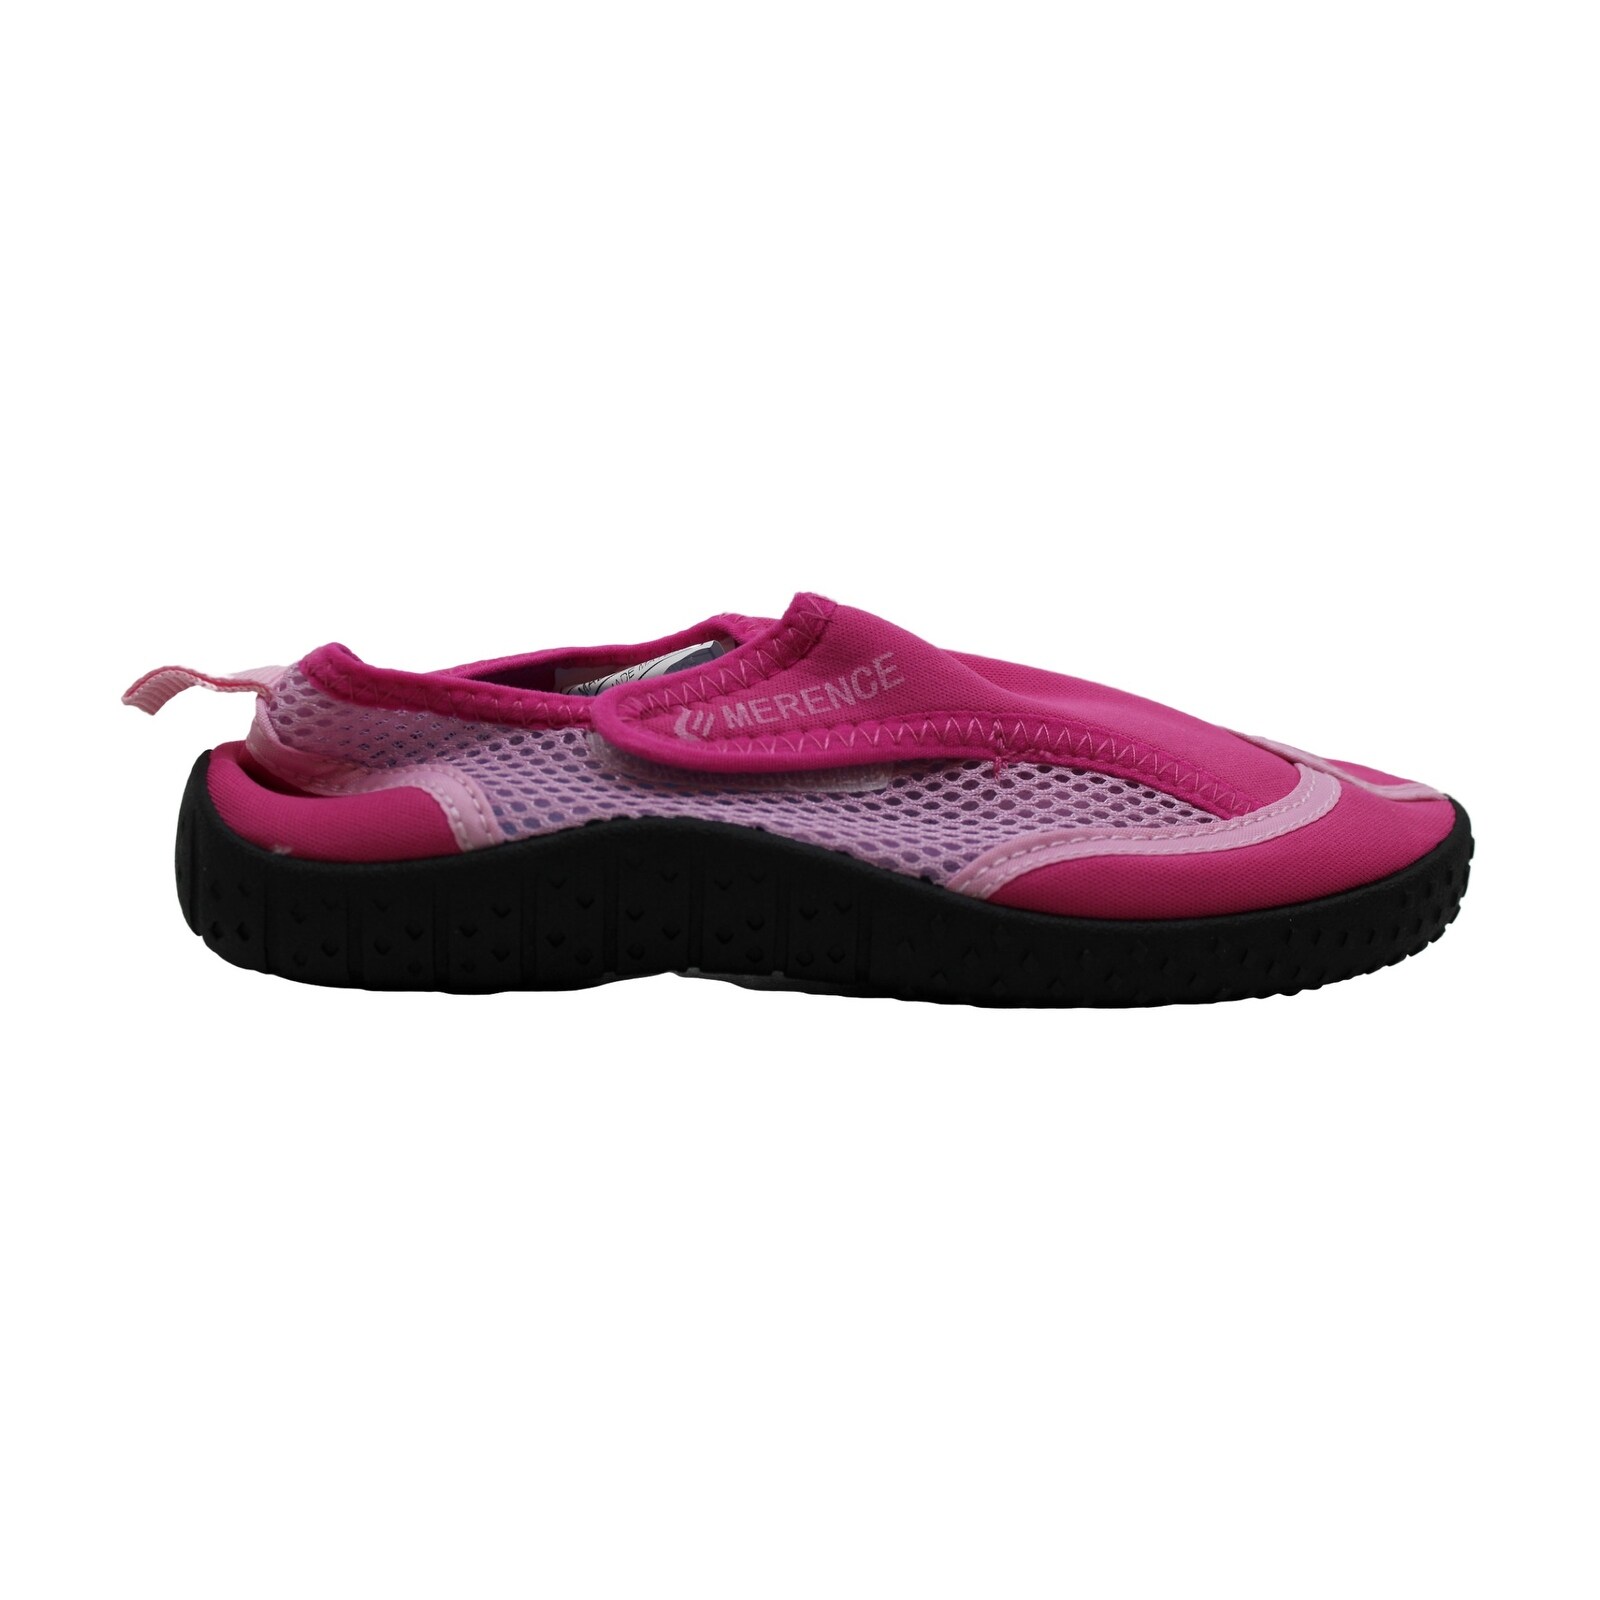 sports direct sea shoes